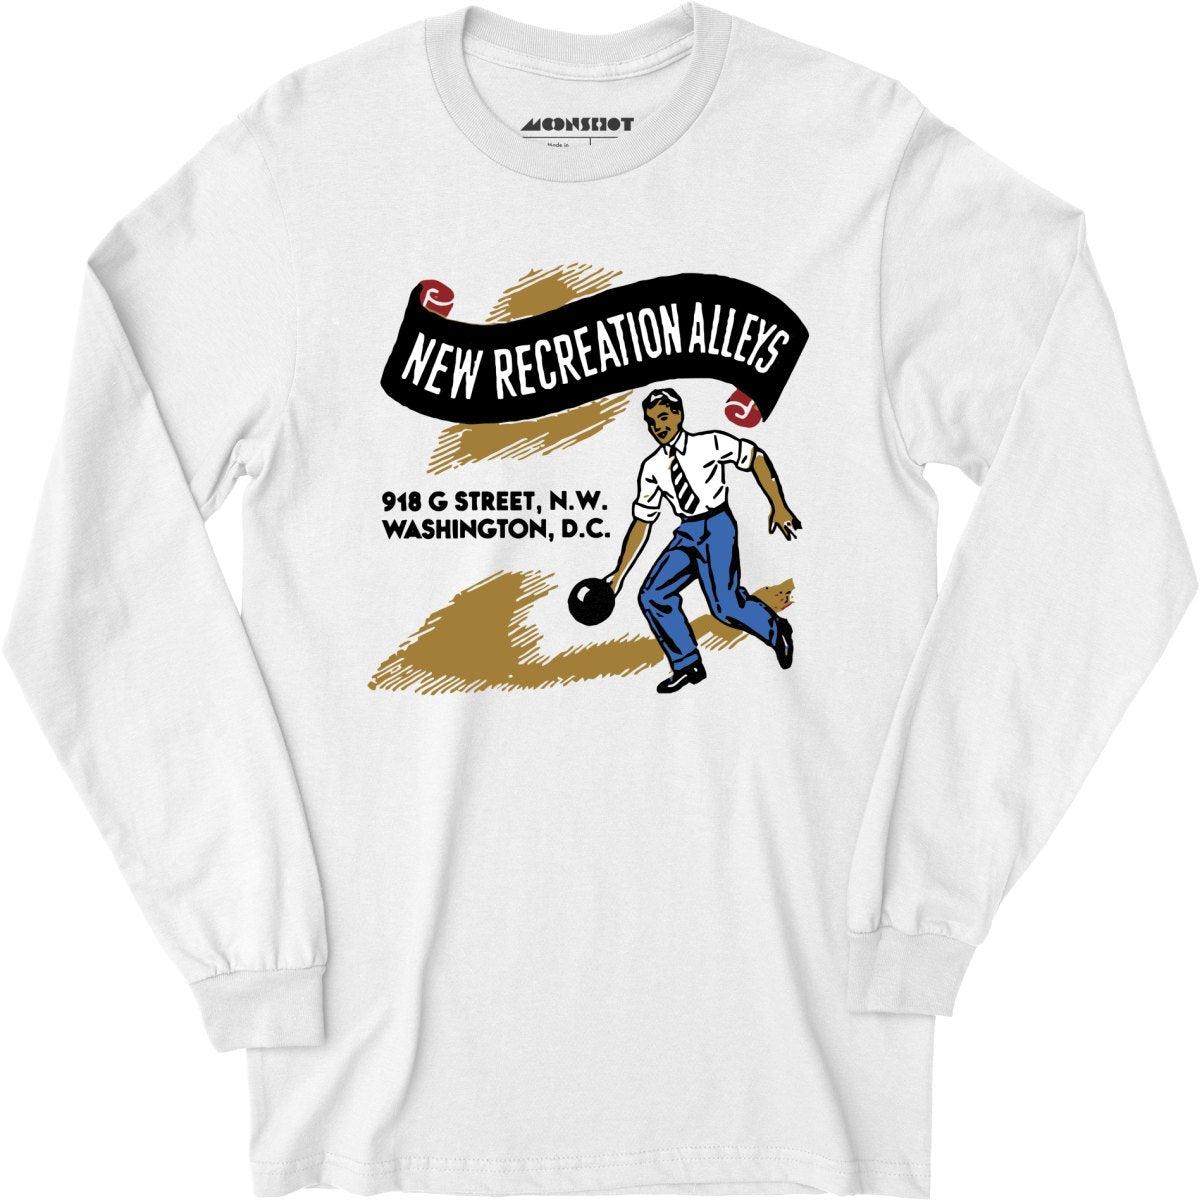 New Recreation Alleys - Washington D.C. - Vintage Bowling Alley - Long Sleeve T-Shirt